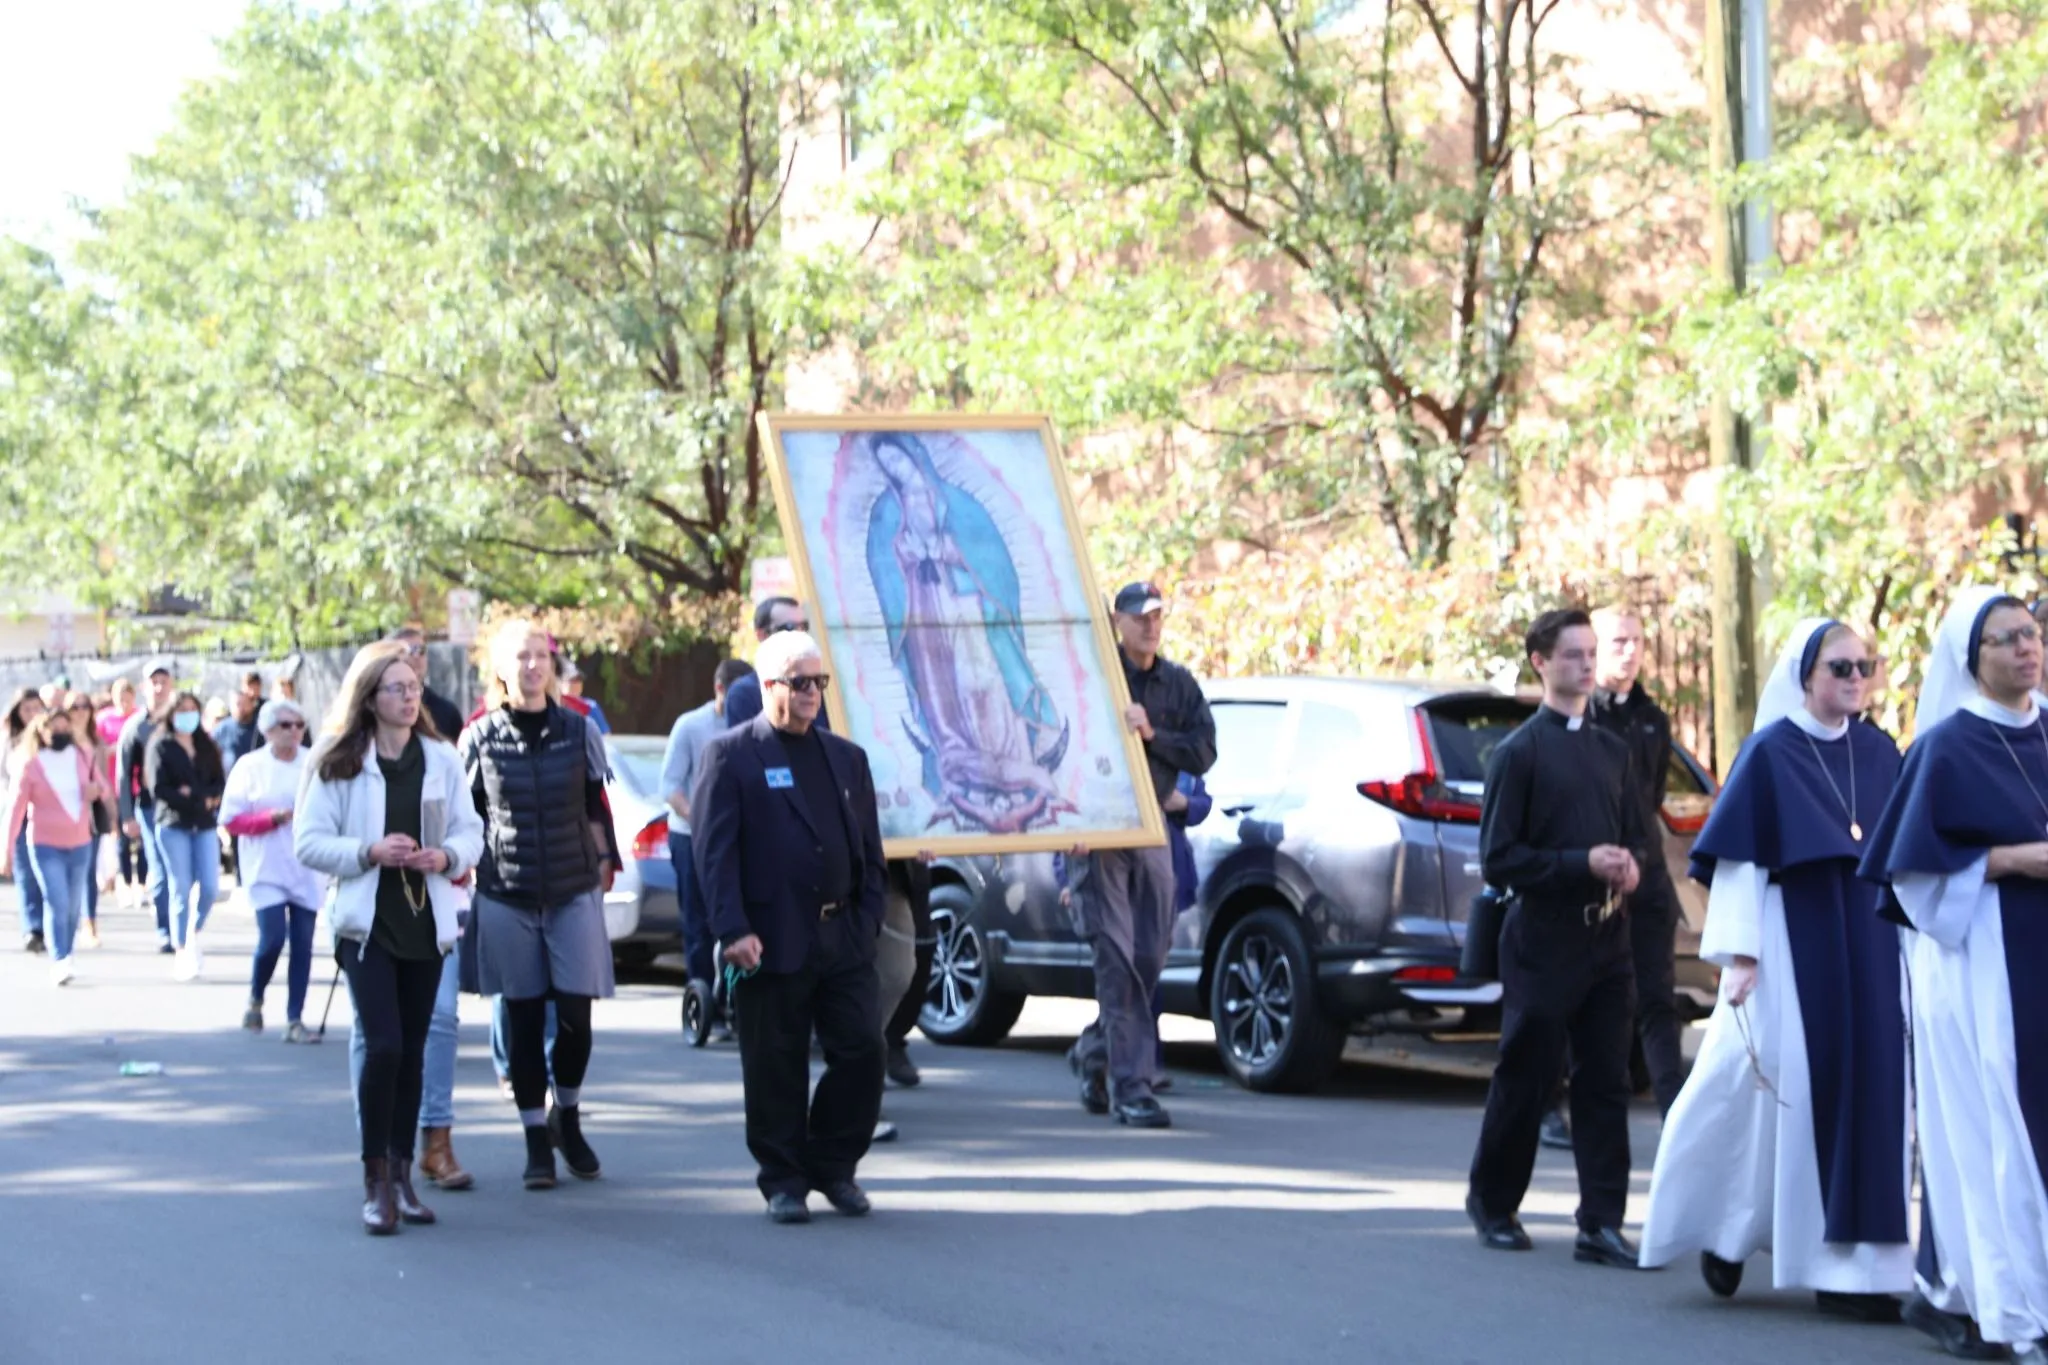 Marchers walk along with an image of Our Lady of Guadalupe during a pro-life Eucharistic Procession Oct. 2, 2021 in Denver.?w=200&h=150